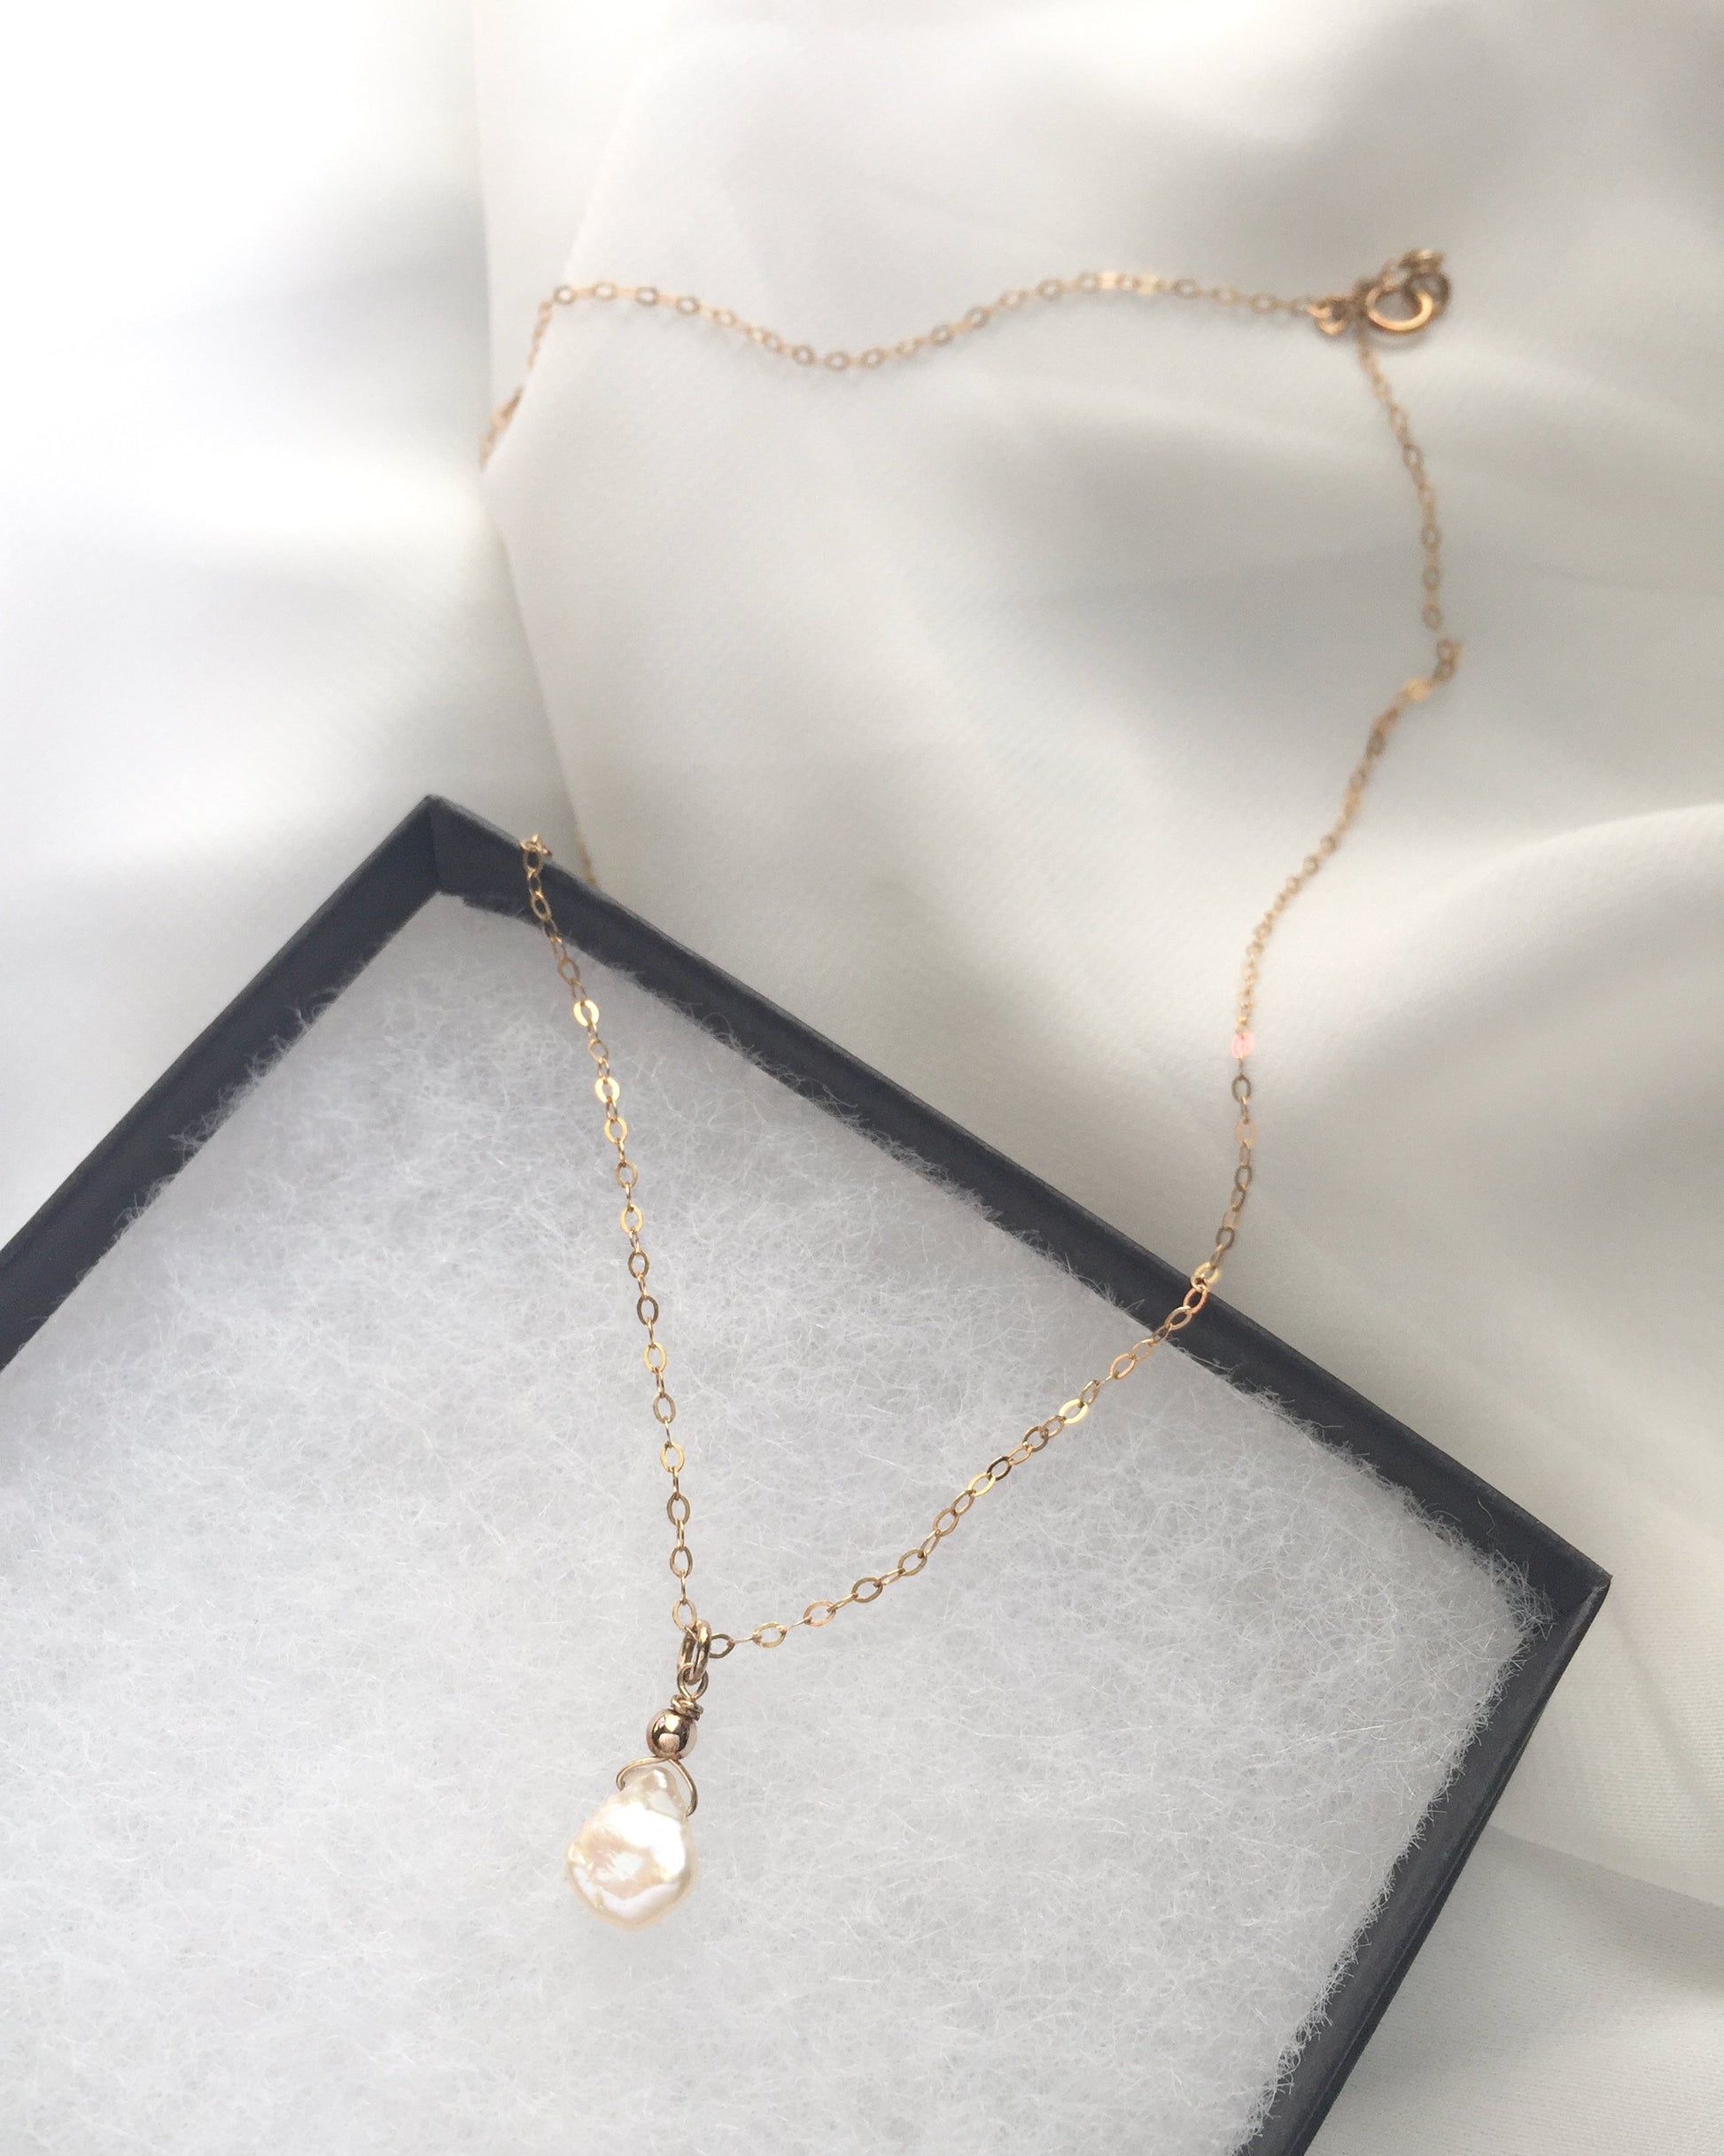 30th Birthday Necklace For Her | 30th Birthday Jewelry For Wife Sister or Daughter | Dainty Pearl Necklace | IB Jewelry